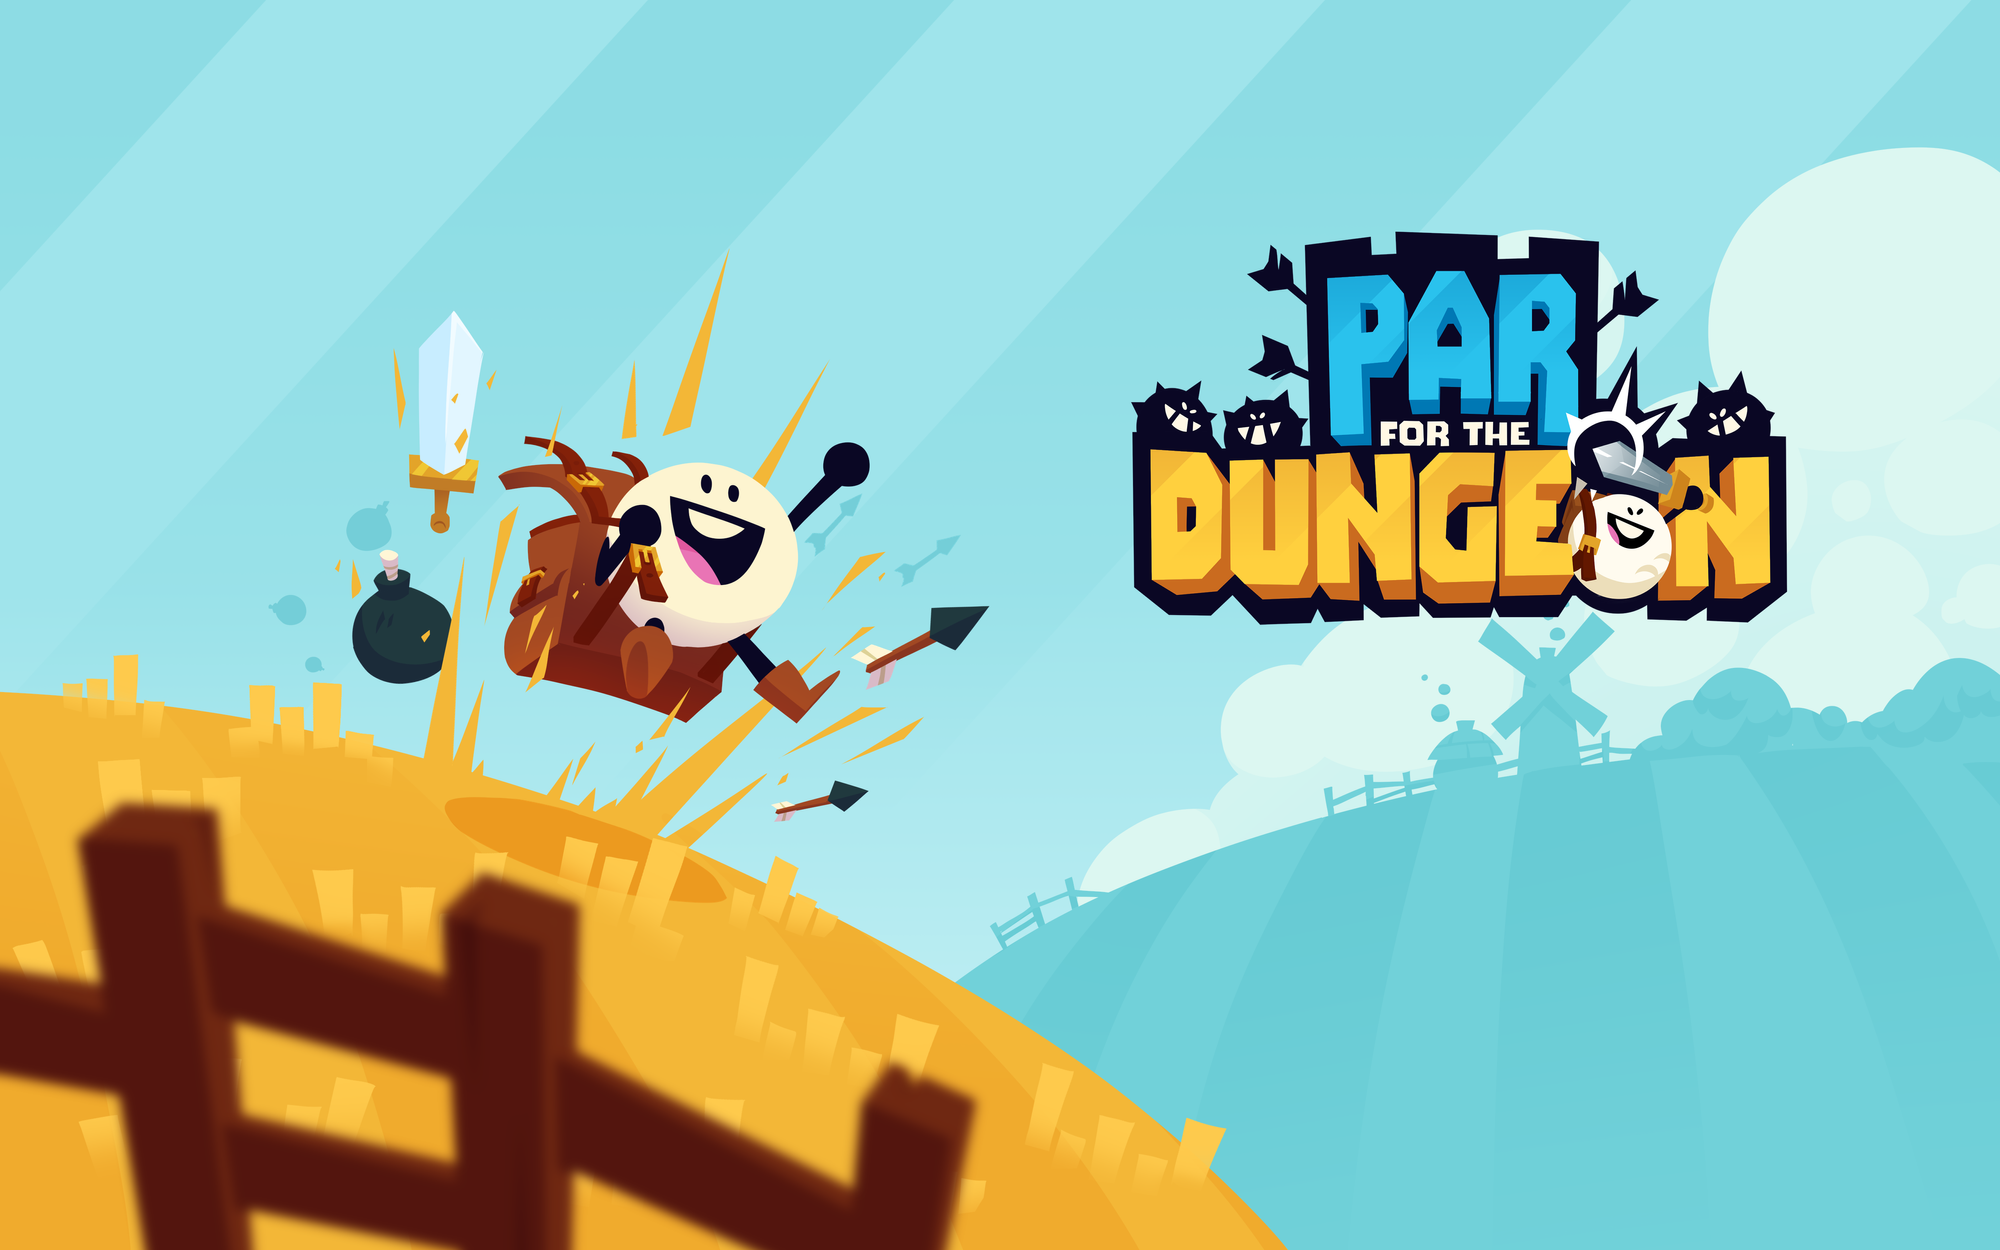 "Par For The Dungeon": A Mini Golf Meets Dungeon Crawler Game, Now Available on PC